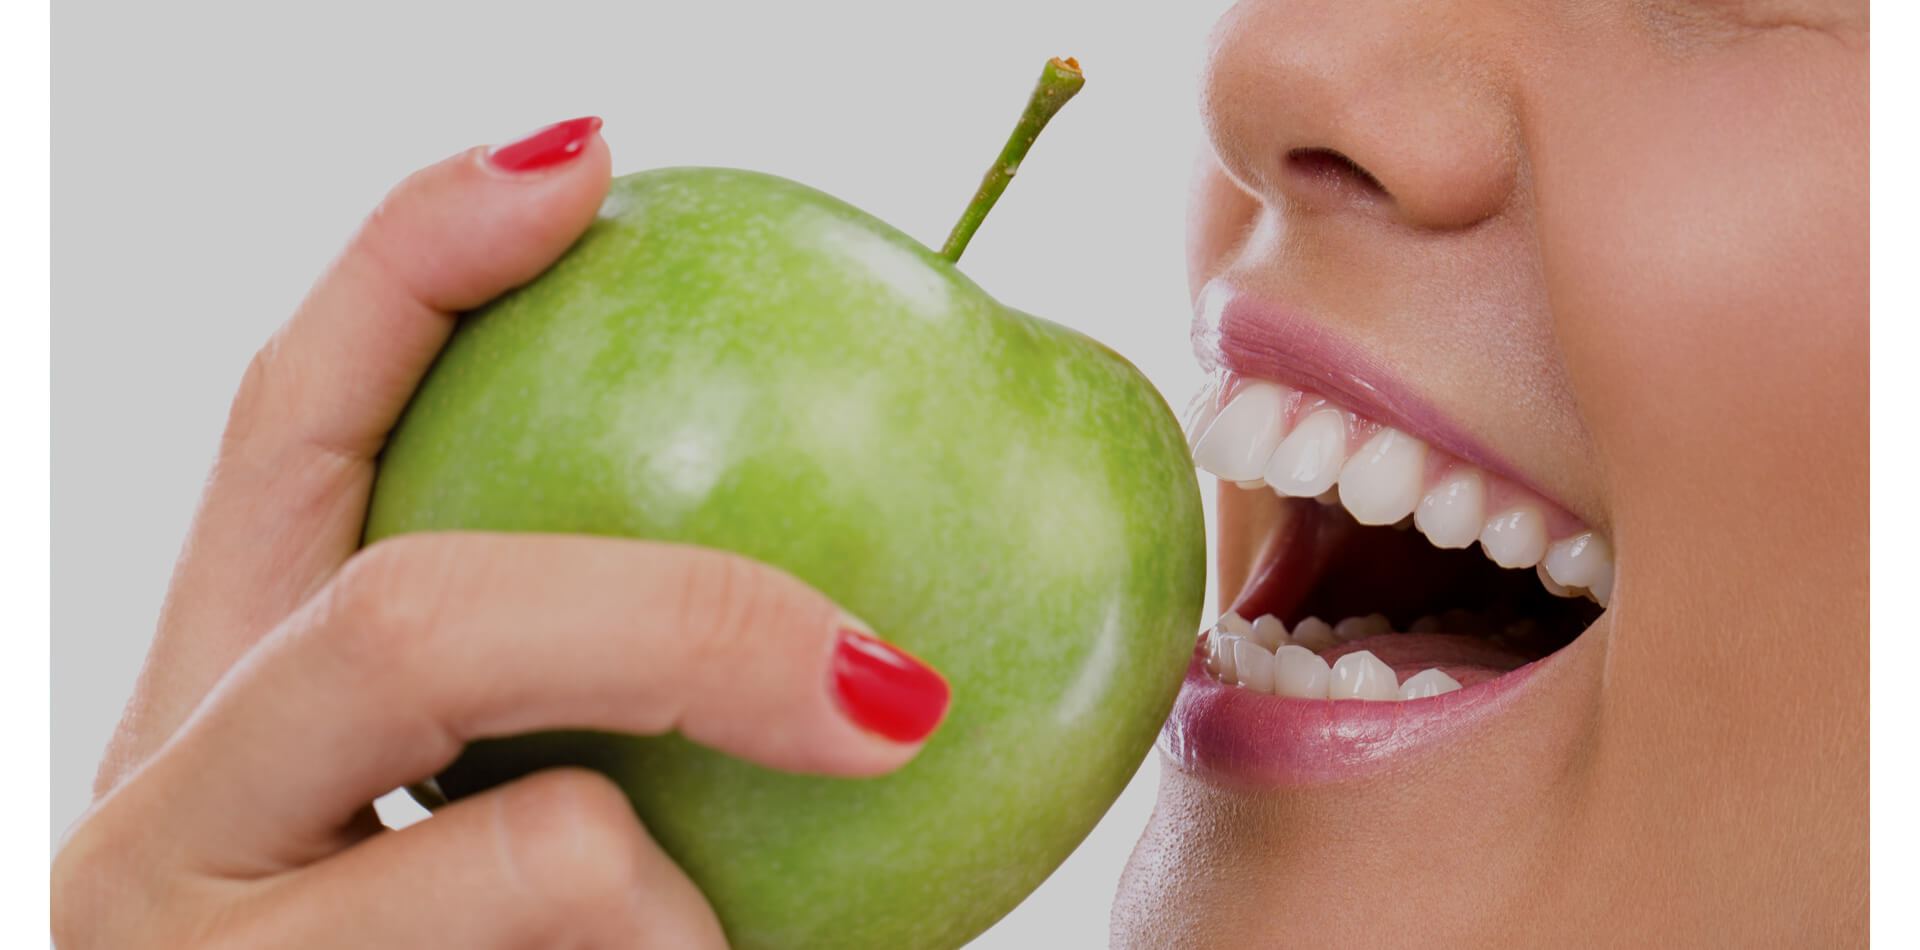 Closeup of the face of a woman eating a green apple